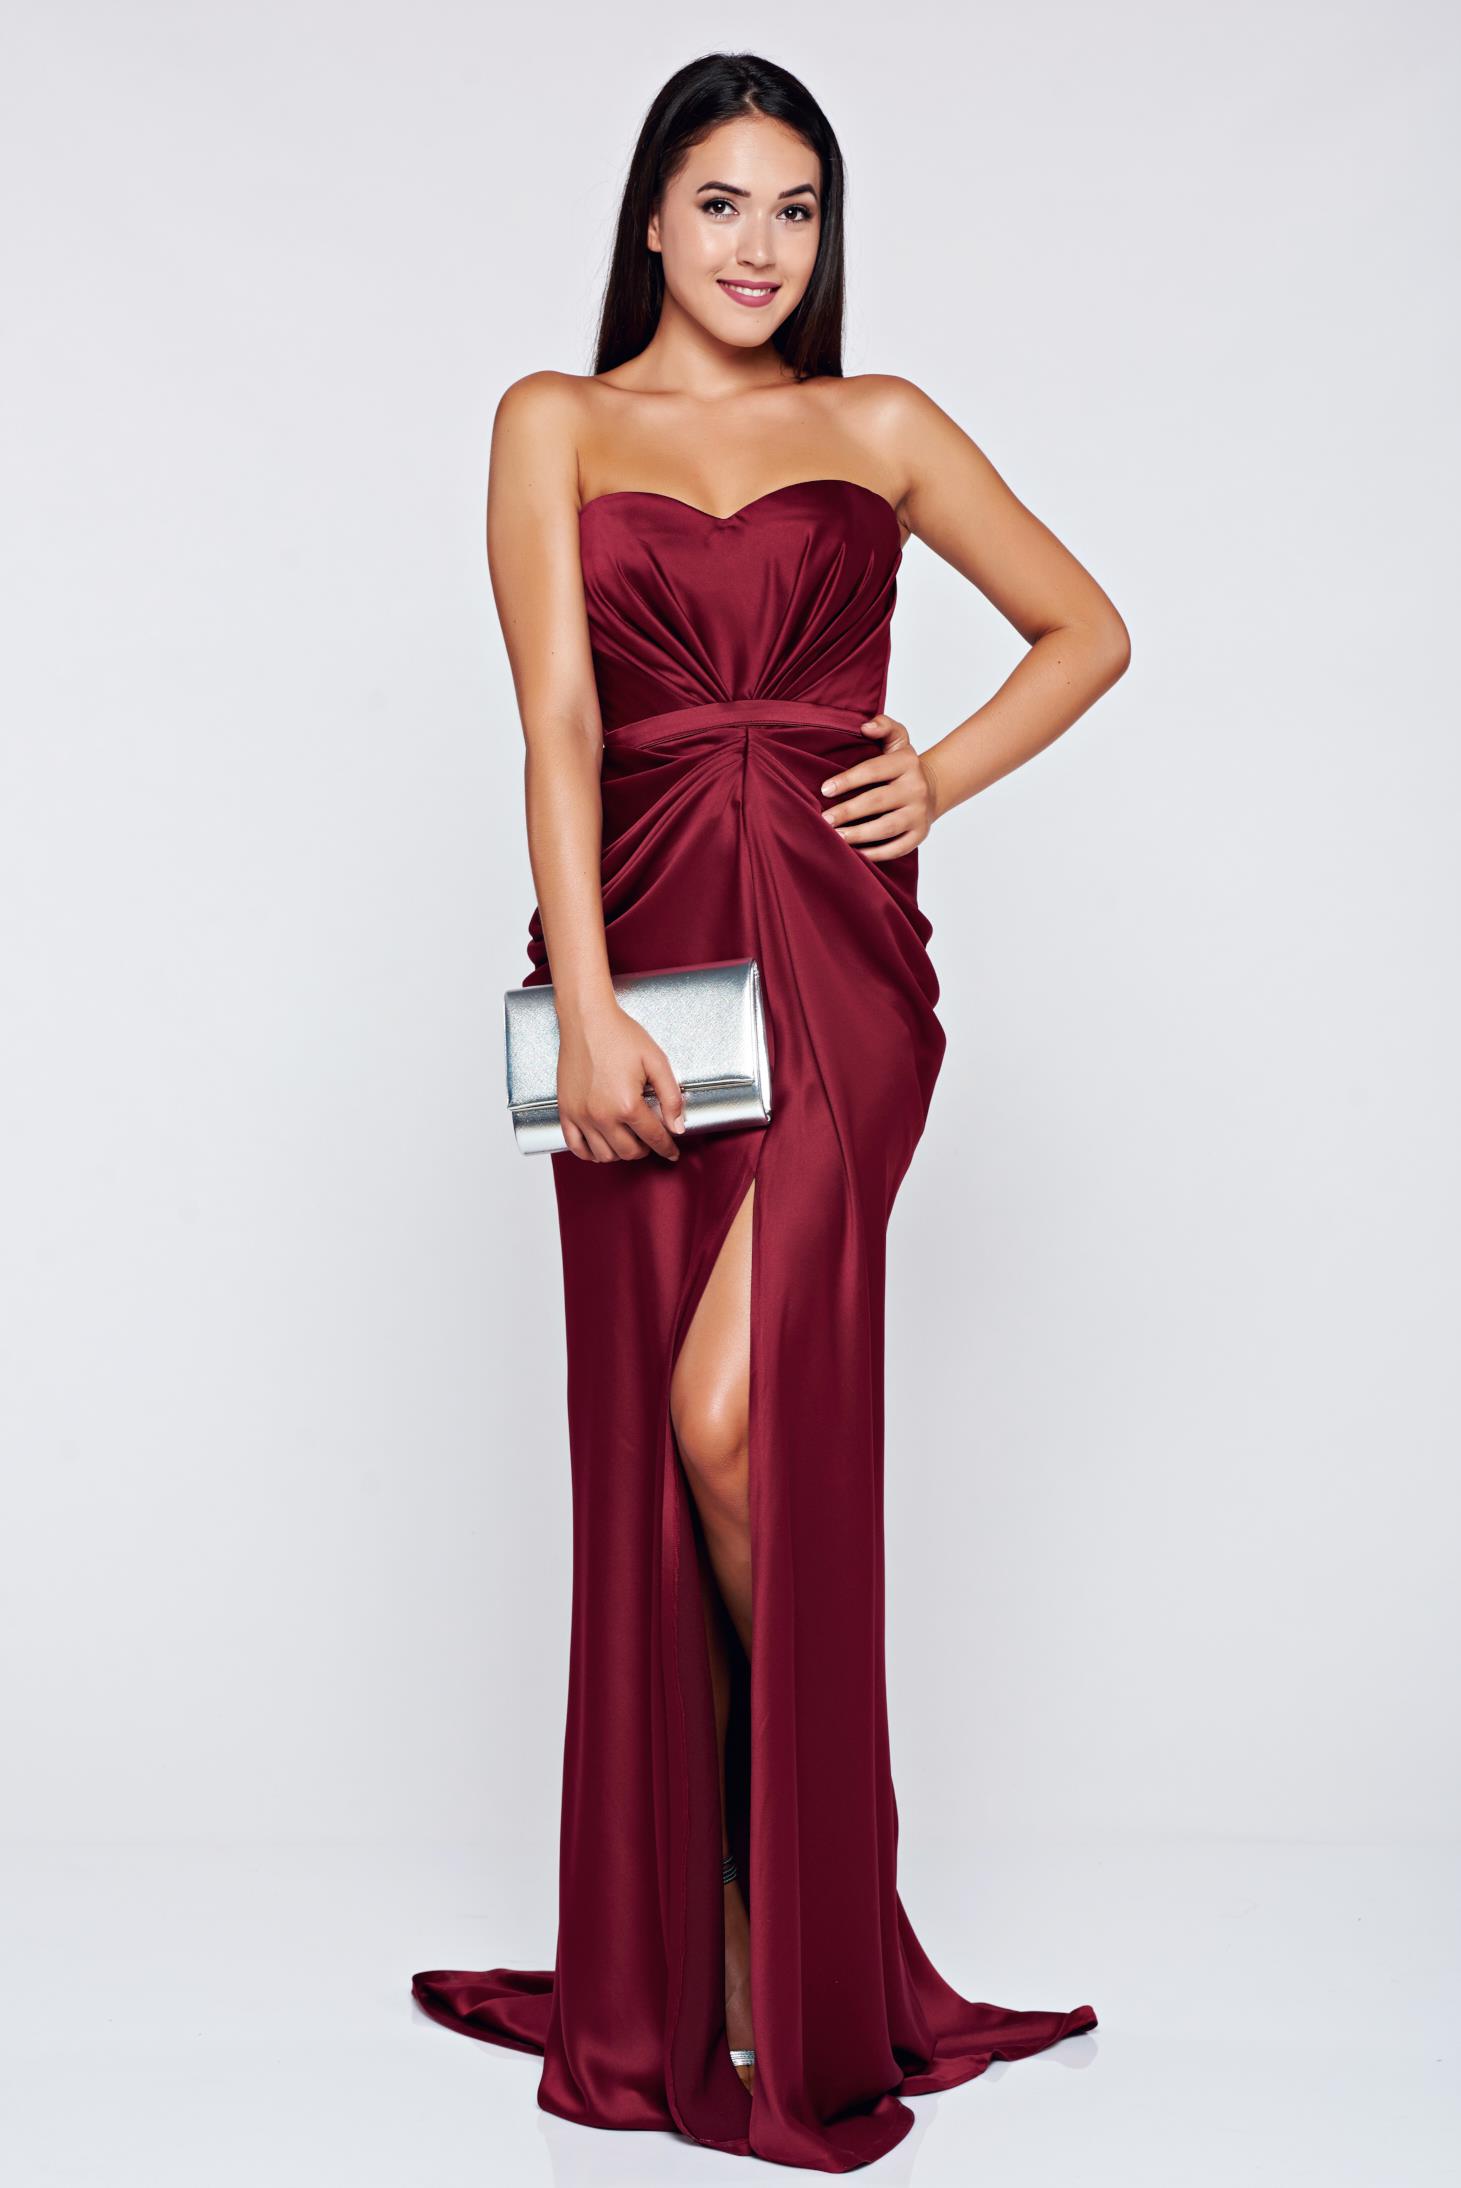 Ana Radu luxurious off shoulder dress from satin fabric texture with  push-up bra accessorized with tied waistband white